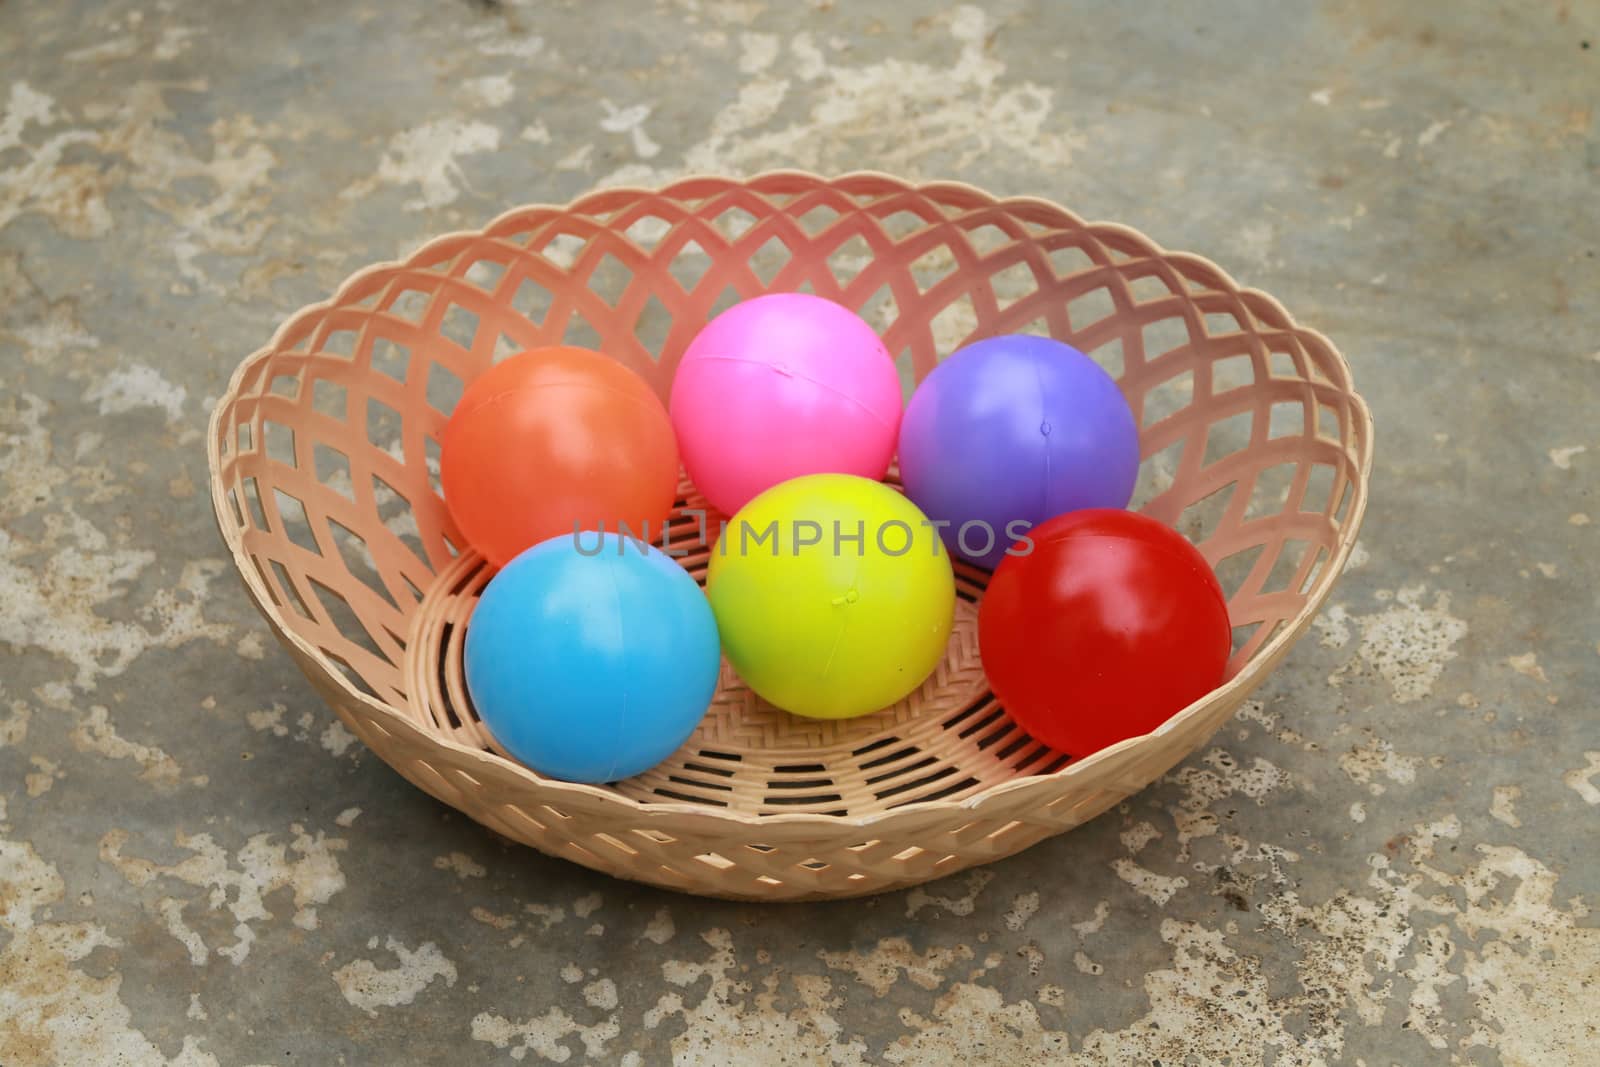 There are many colour balls in the basket.All made from plastic.